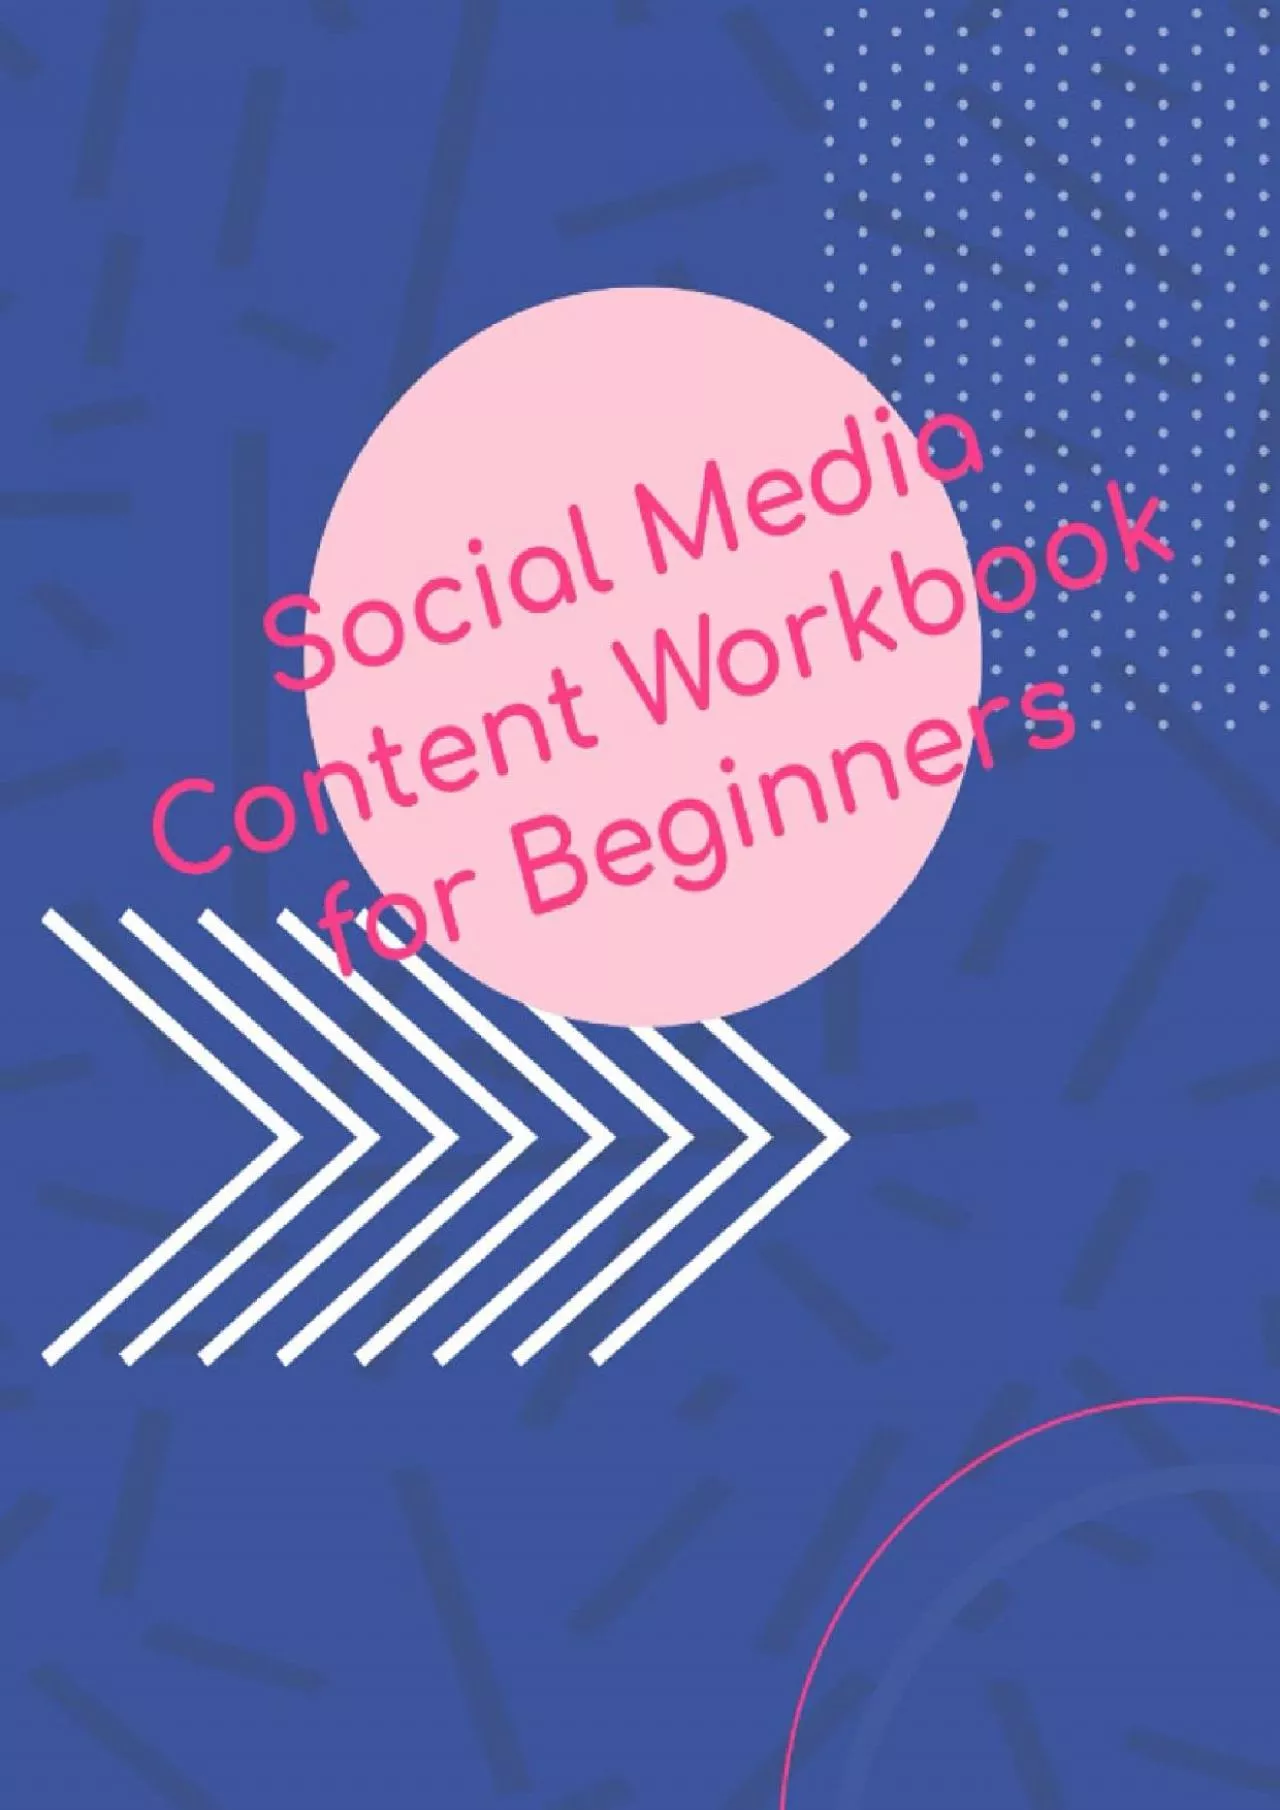 Social Media Content Workbook for Beginners: A Social Media Marketing Planner with Simple